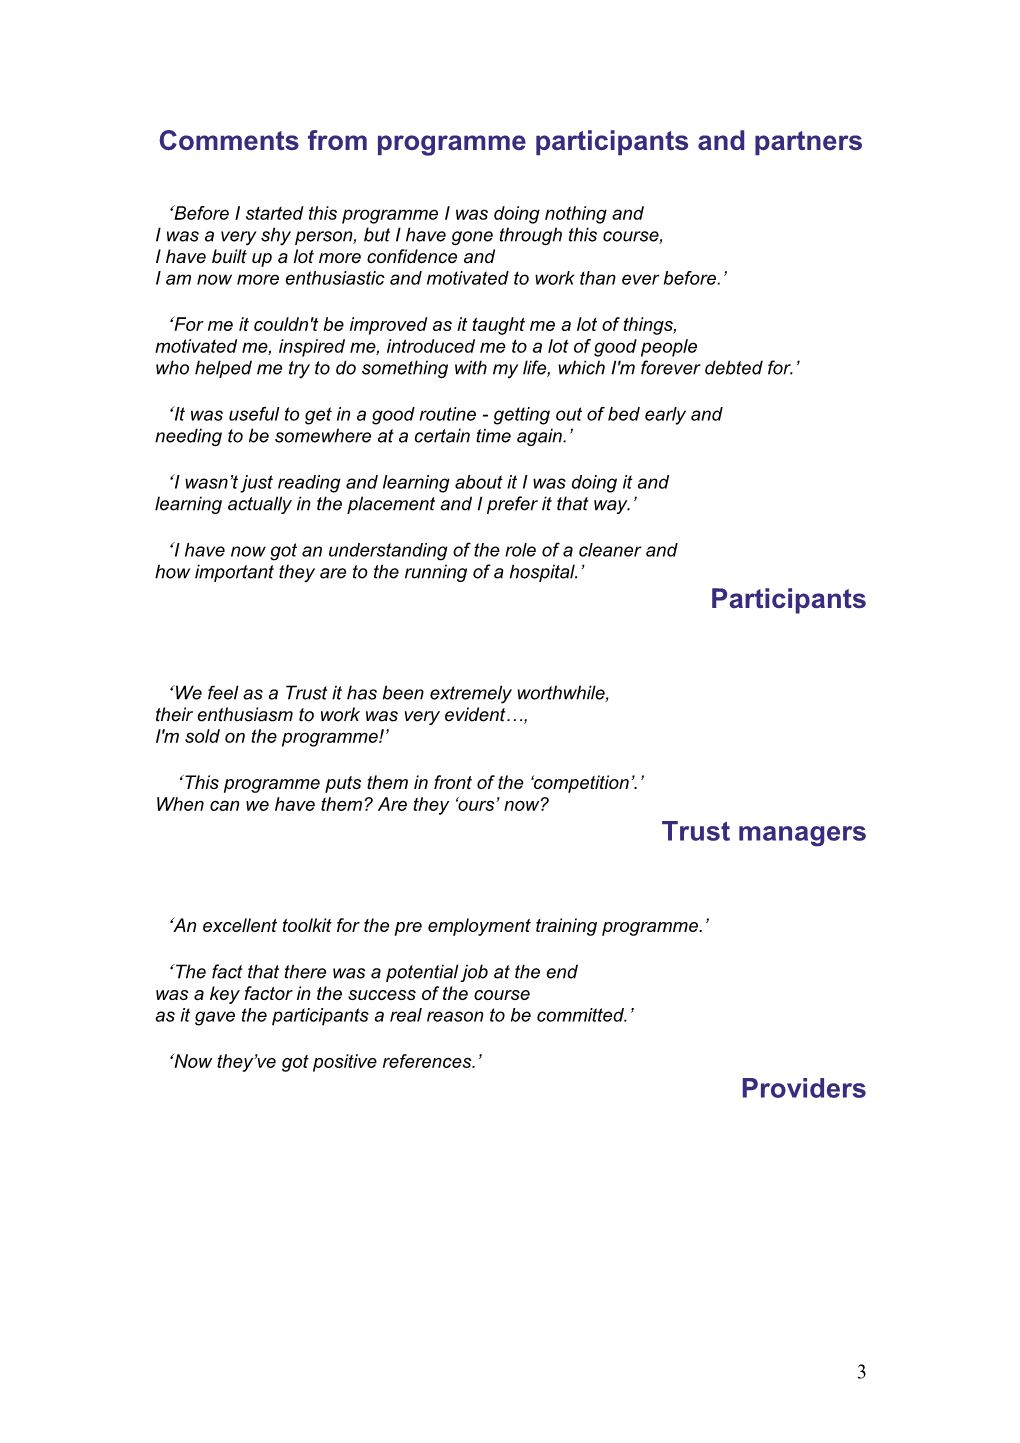 Skills for Health Pre-Employment Programme Project